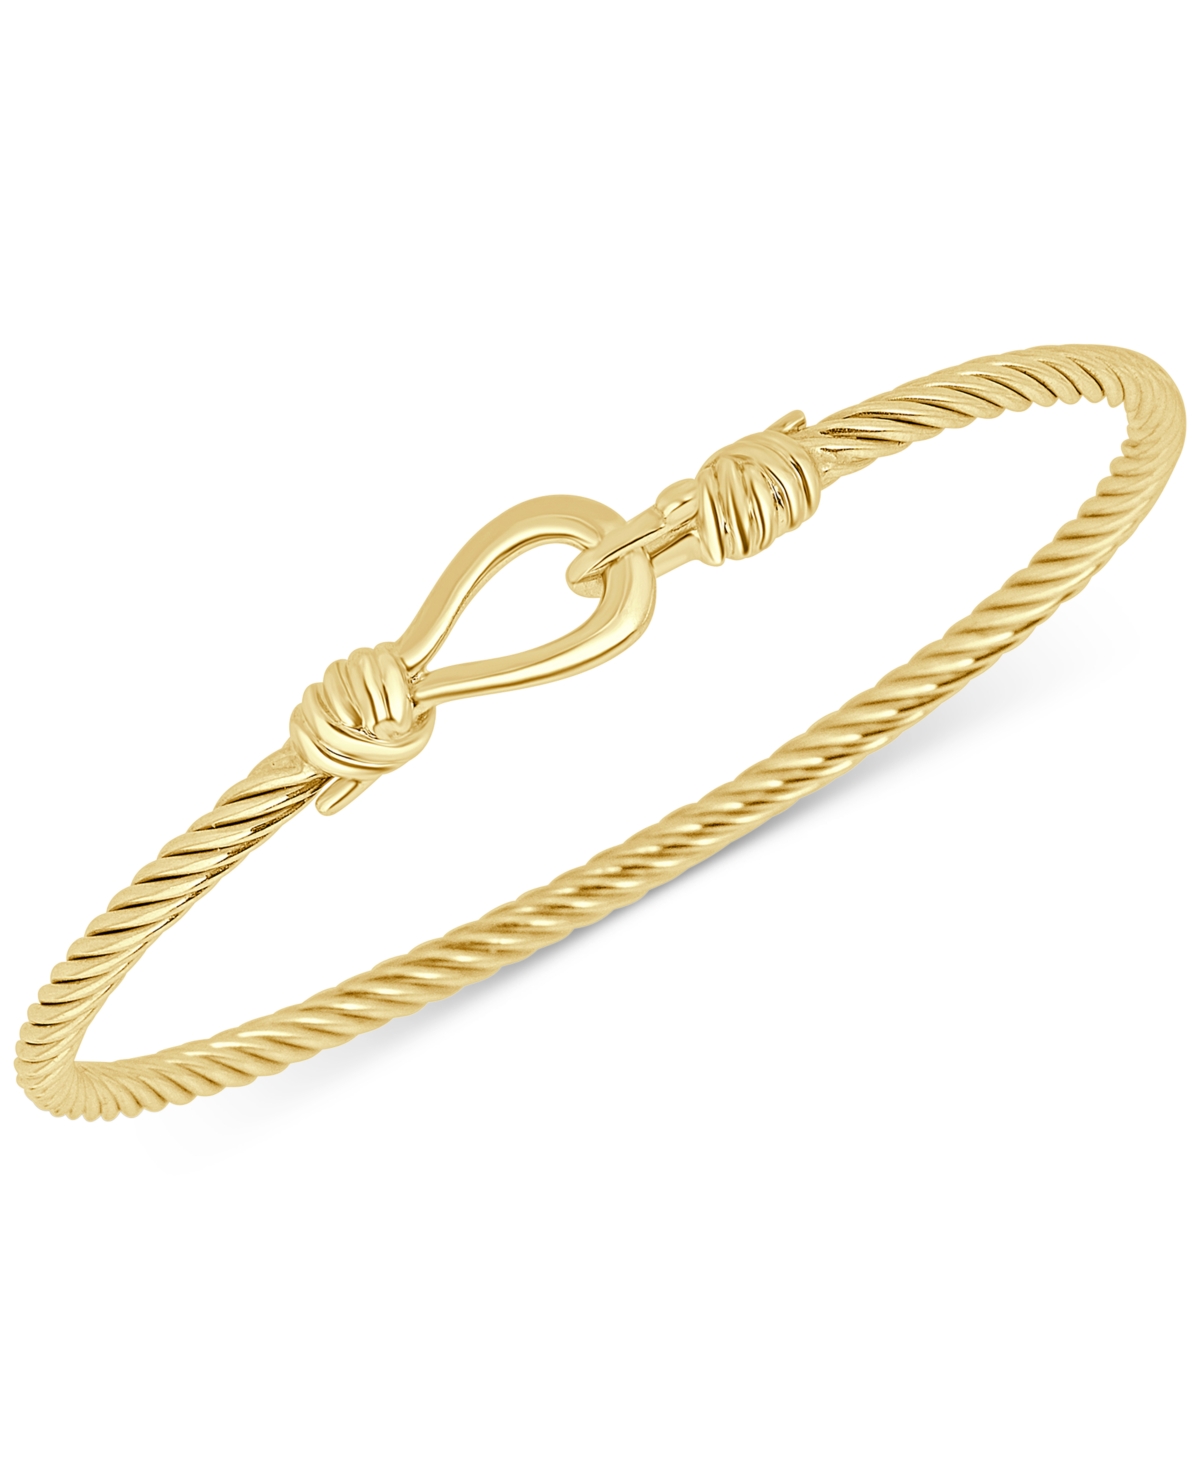 Torchon Knot Bangle Bracelet in 14k Gold-Plated Sterling Silver - Gold